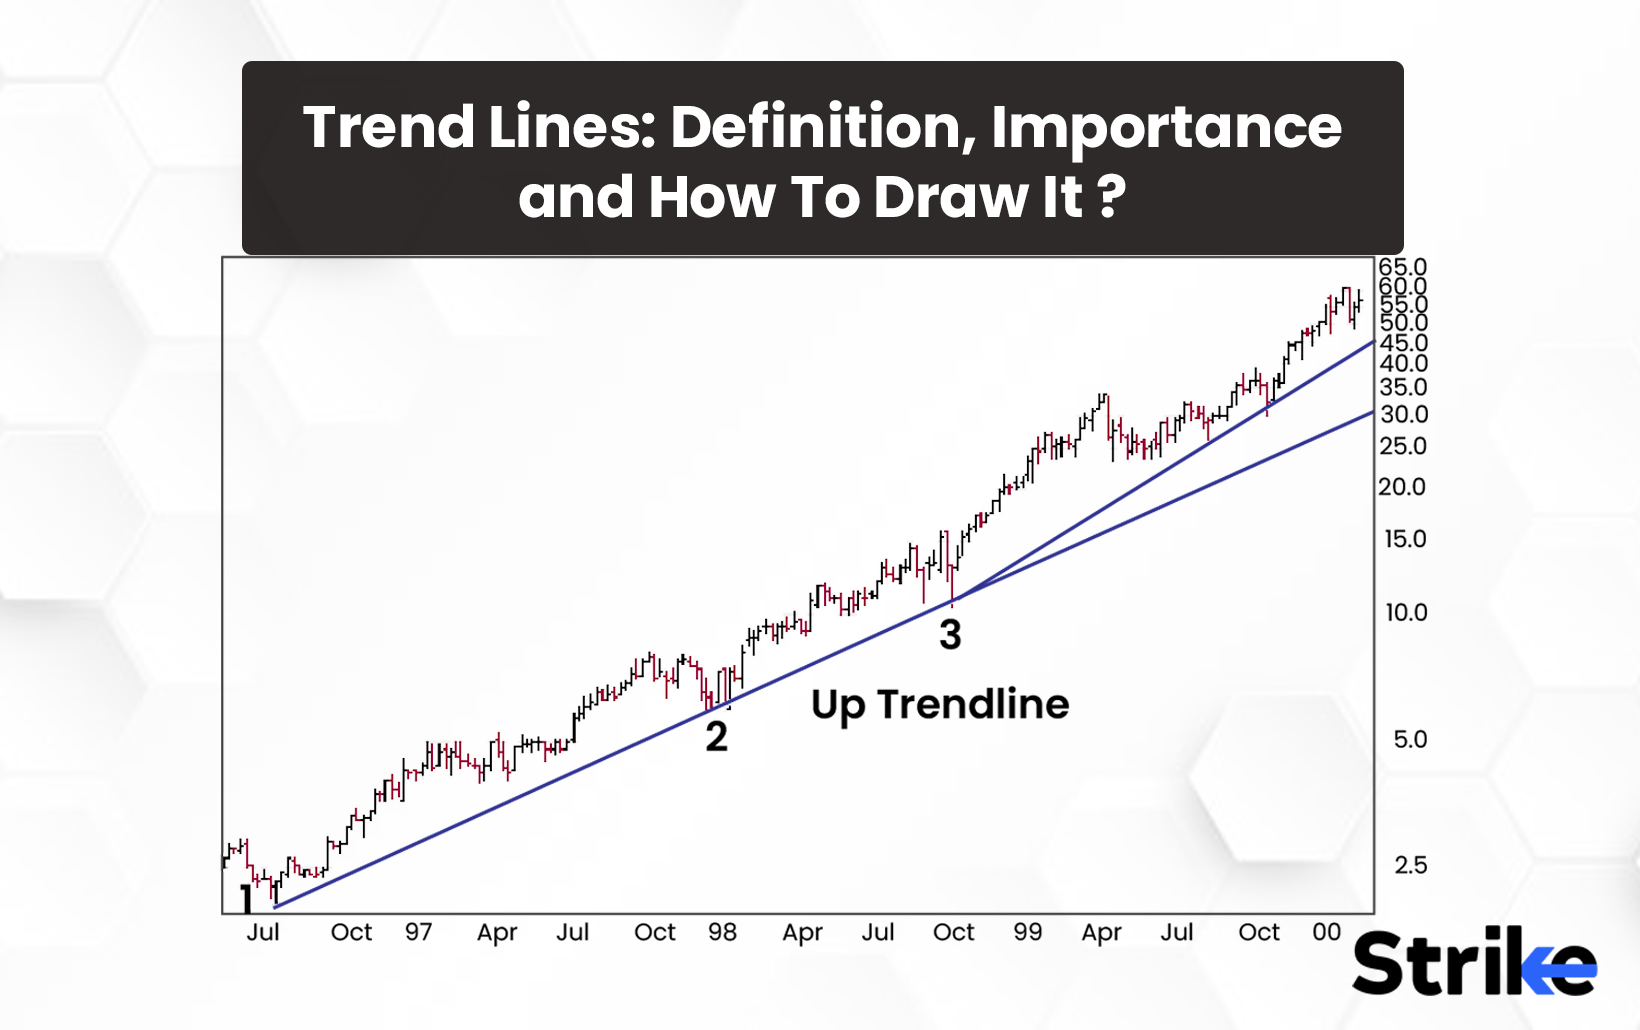 Trend Lines: Definition, Importance and How To Draw It?